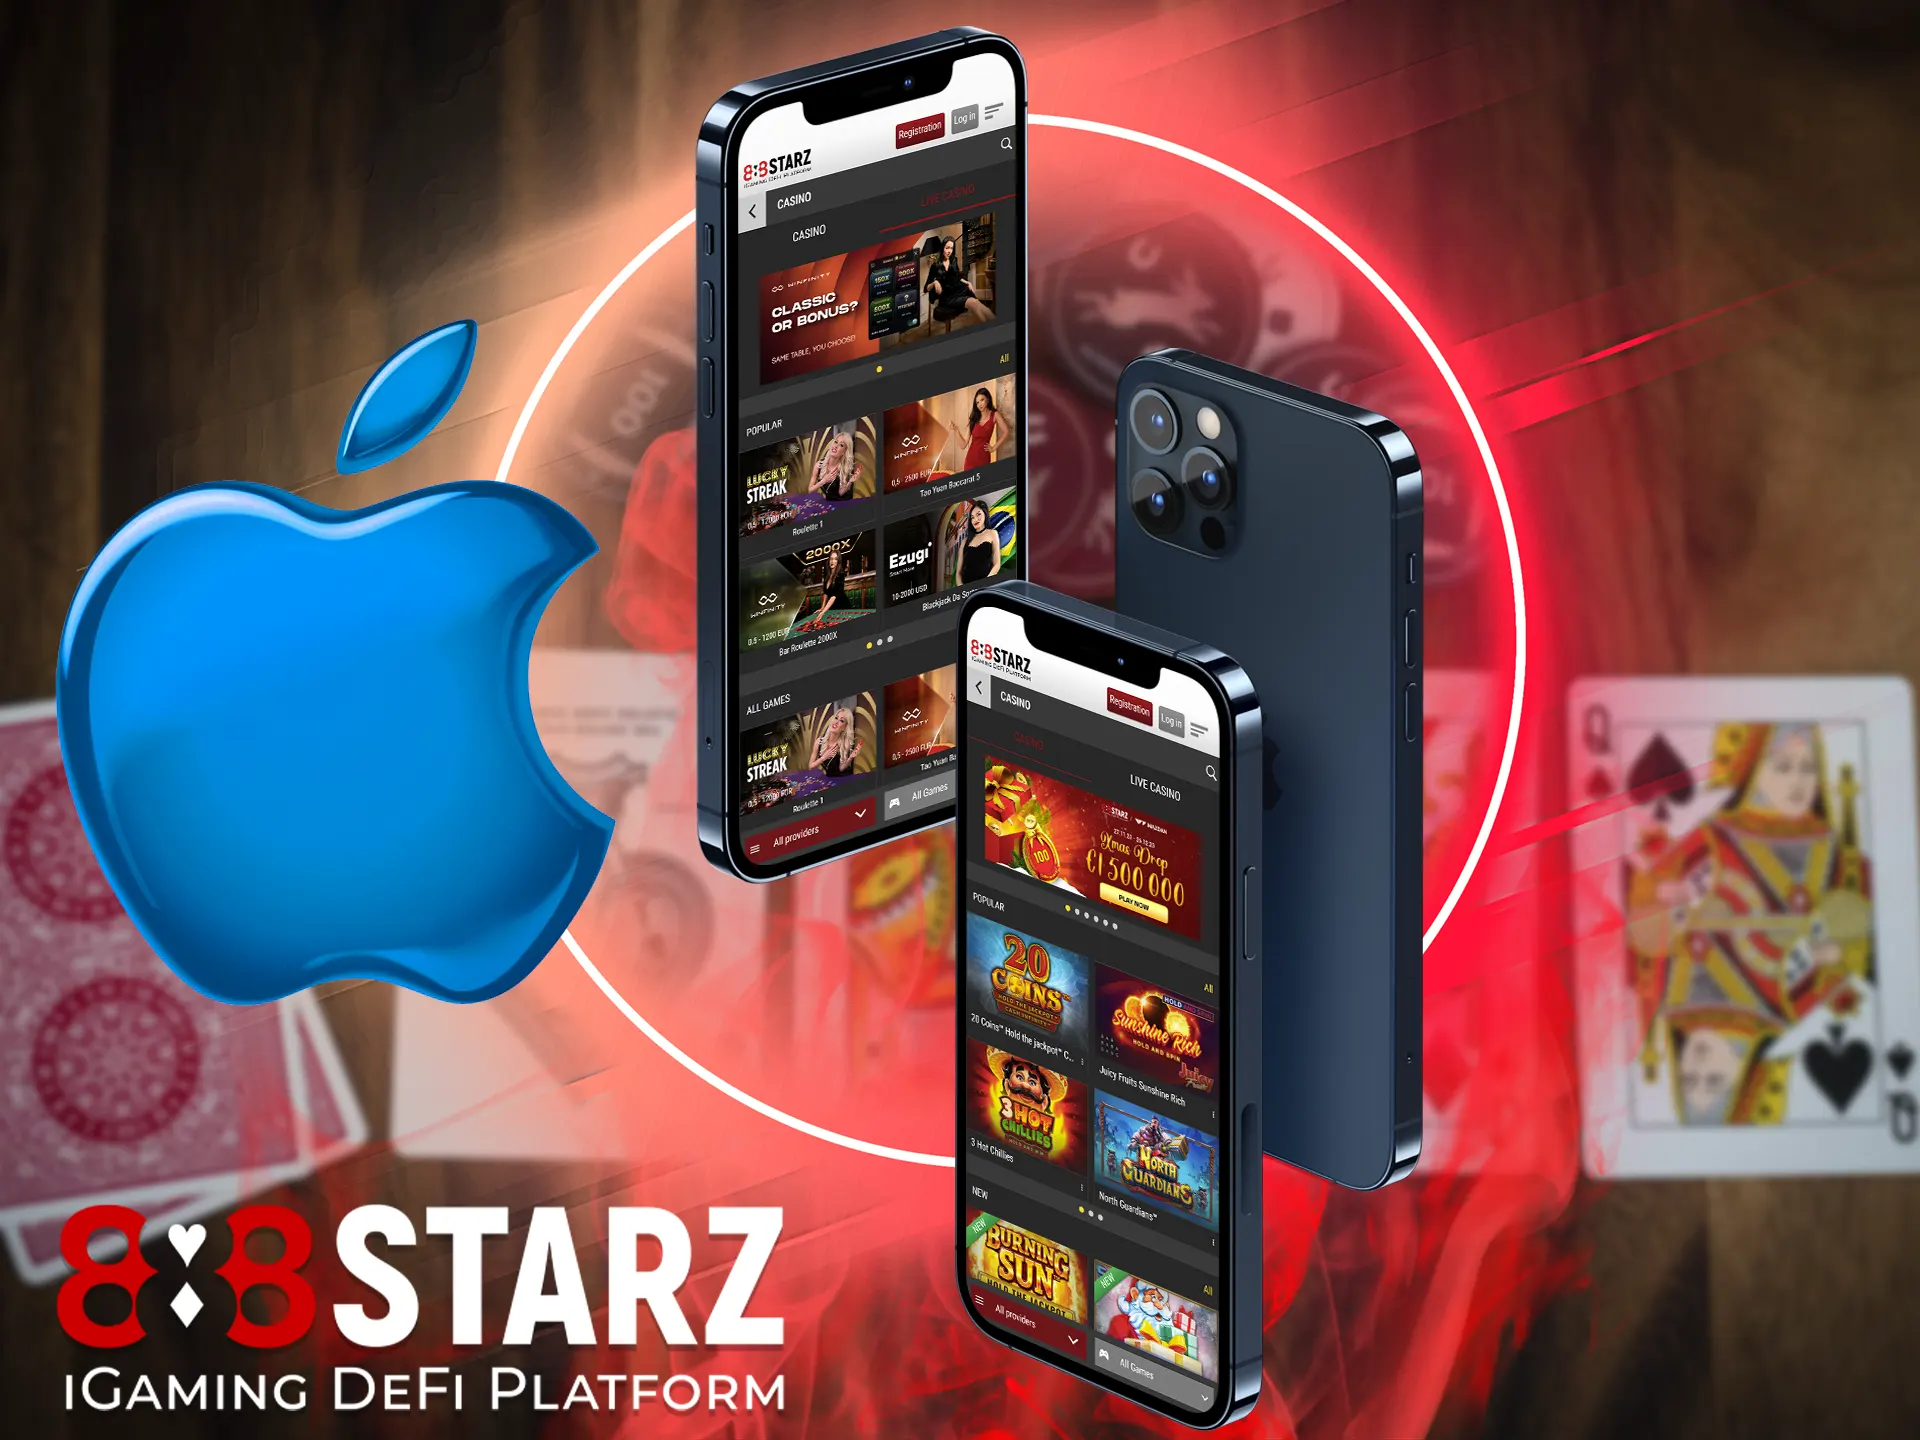 We made sure that the application 888starz works perfectly on most Apple devices, so we can recommend you to download.